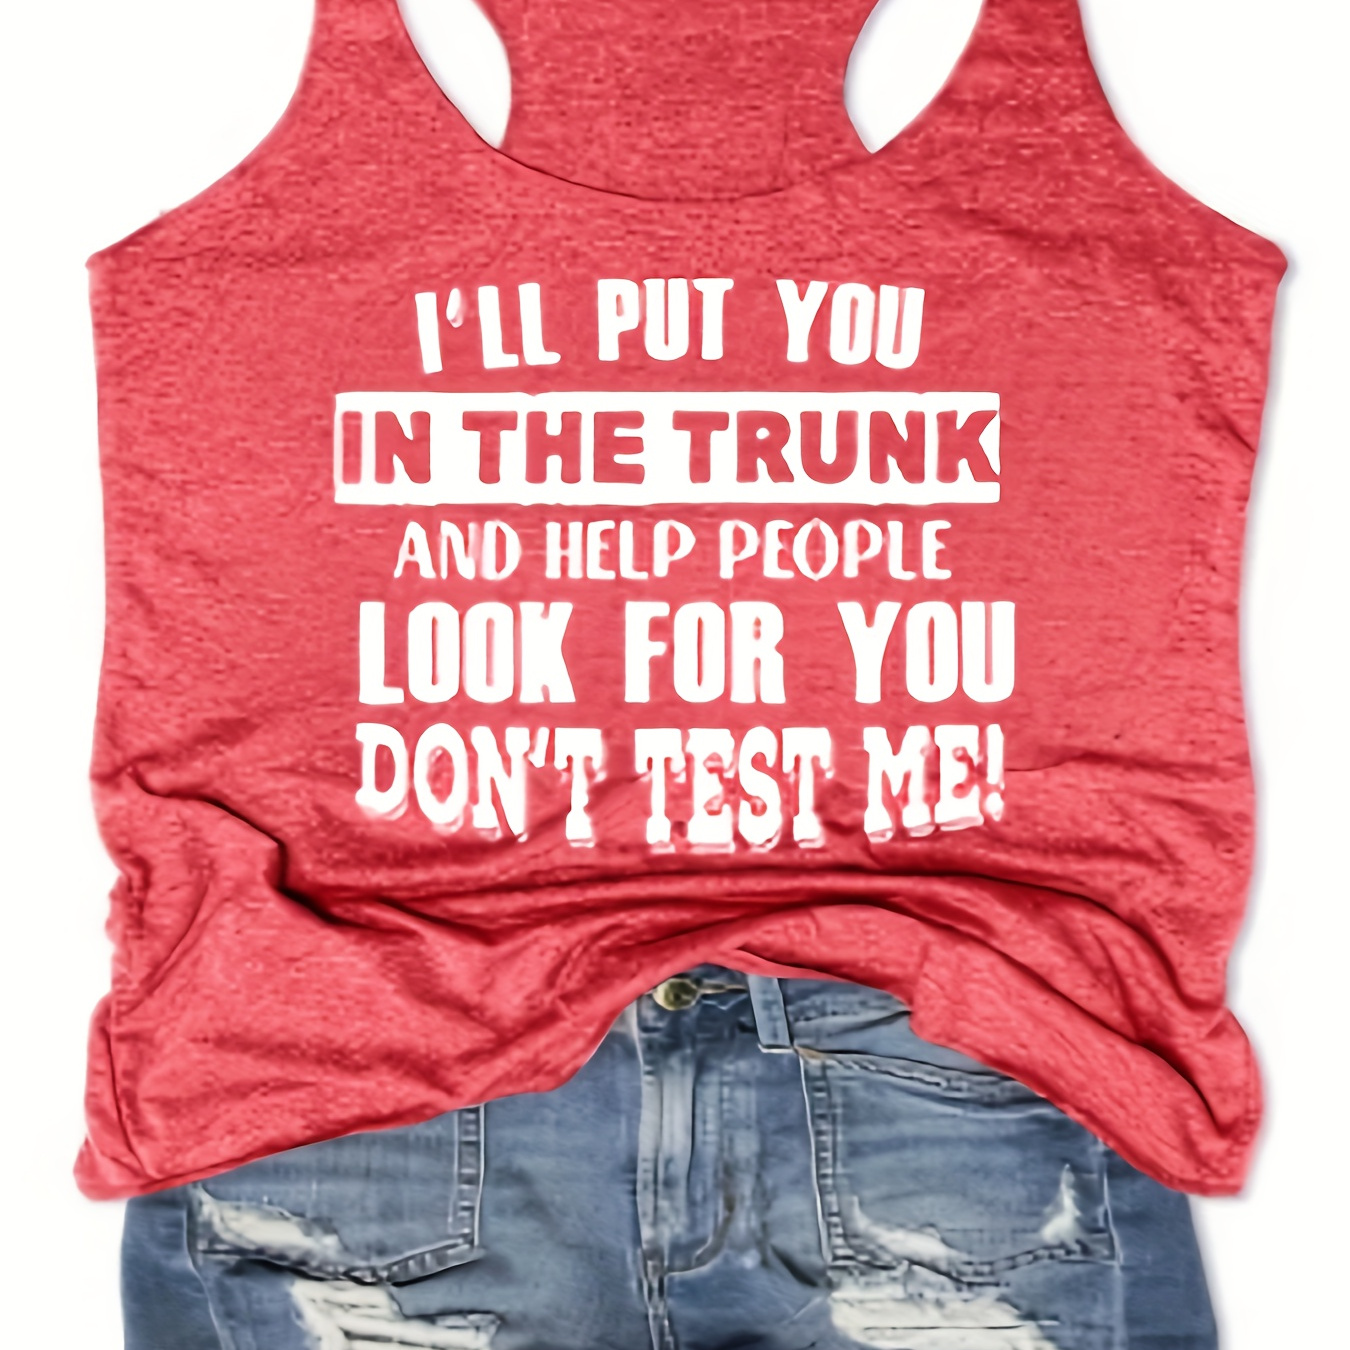 

Women's Summer Fashion Slim Fit Tank Top, Casual Style, Sassy "i'll Put You In The Trunk" Print, Soft Breathable Sleeveless Shirt, Streetwear